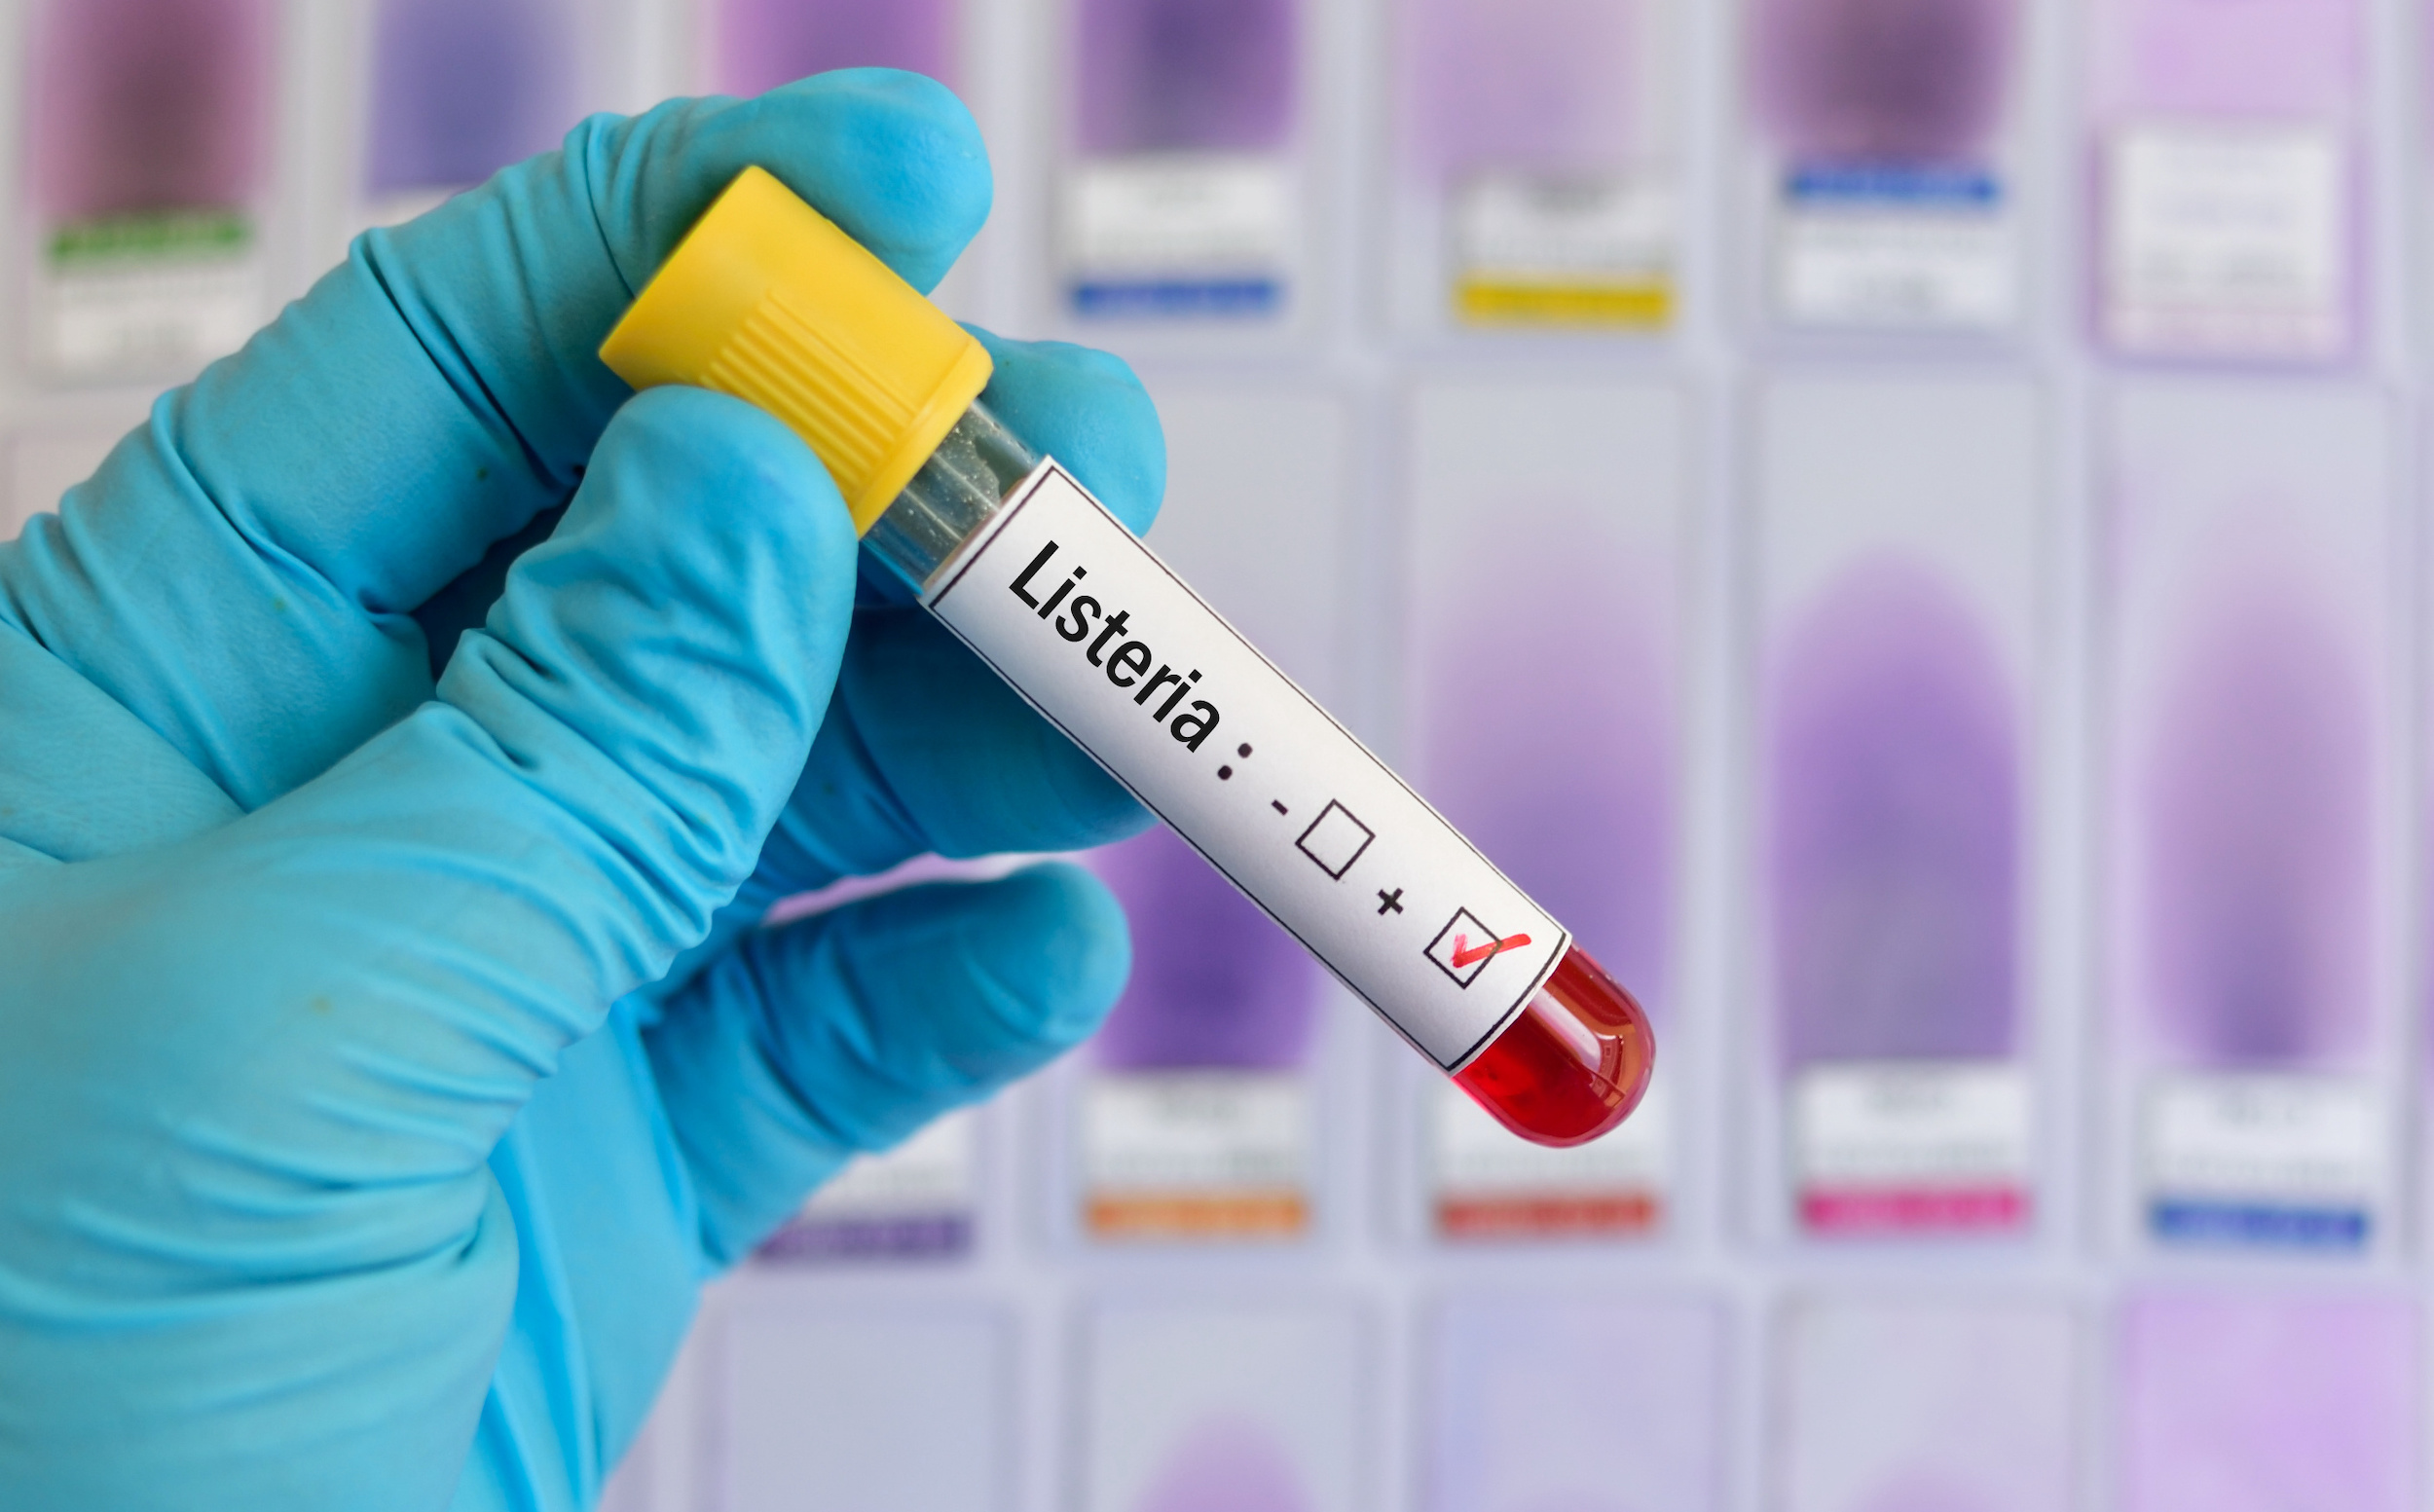 Cdc warns pregnant people not to eat certain cheeses and meats because of listeria. Image shows listeria test tube in a gloved hand.